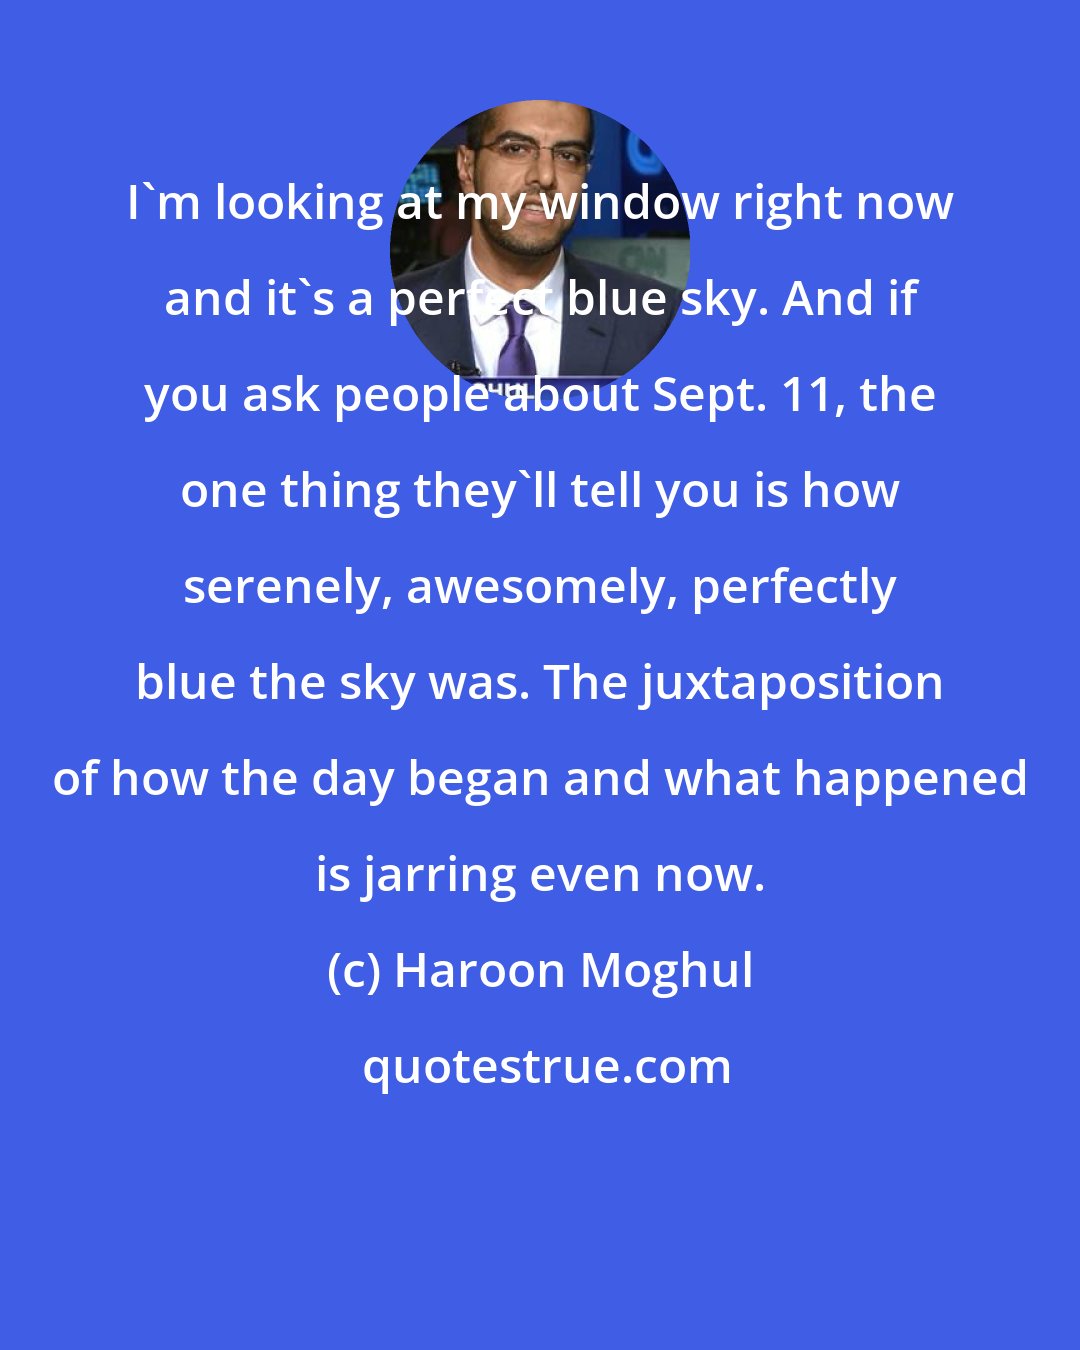 Haroon Moghul: I'm looking at my window right now and it's a perfect blue sky. And if you ask people about Sept. 11, the one thing they'll tell you is how serenely, awesomely, perfectly blue the sky was. The juxtaposition of how the day began and what happened is jarring even now.